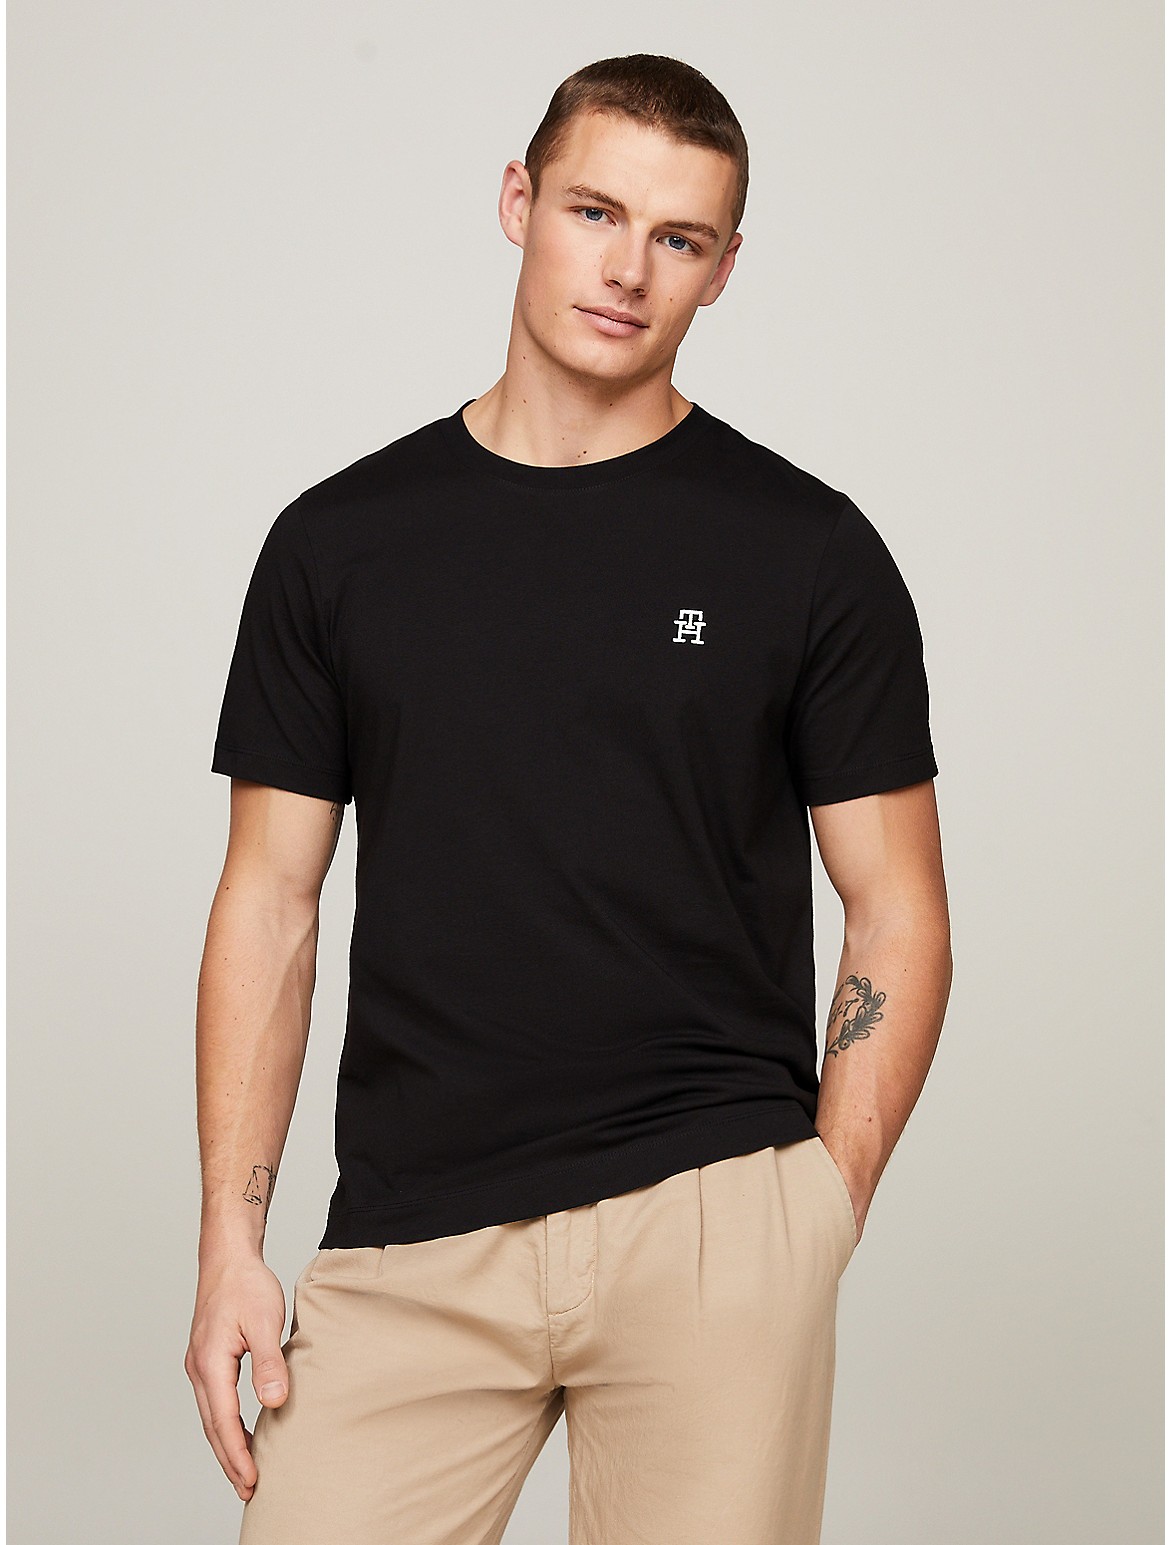 Tommy Hilfiger Men's Embroidered TH Logo T-Shirt